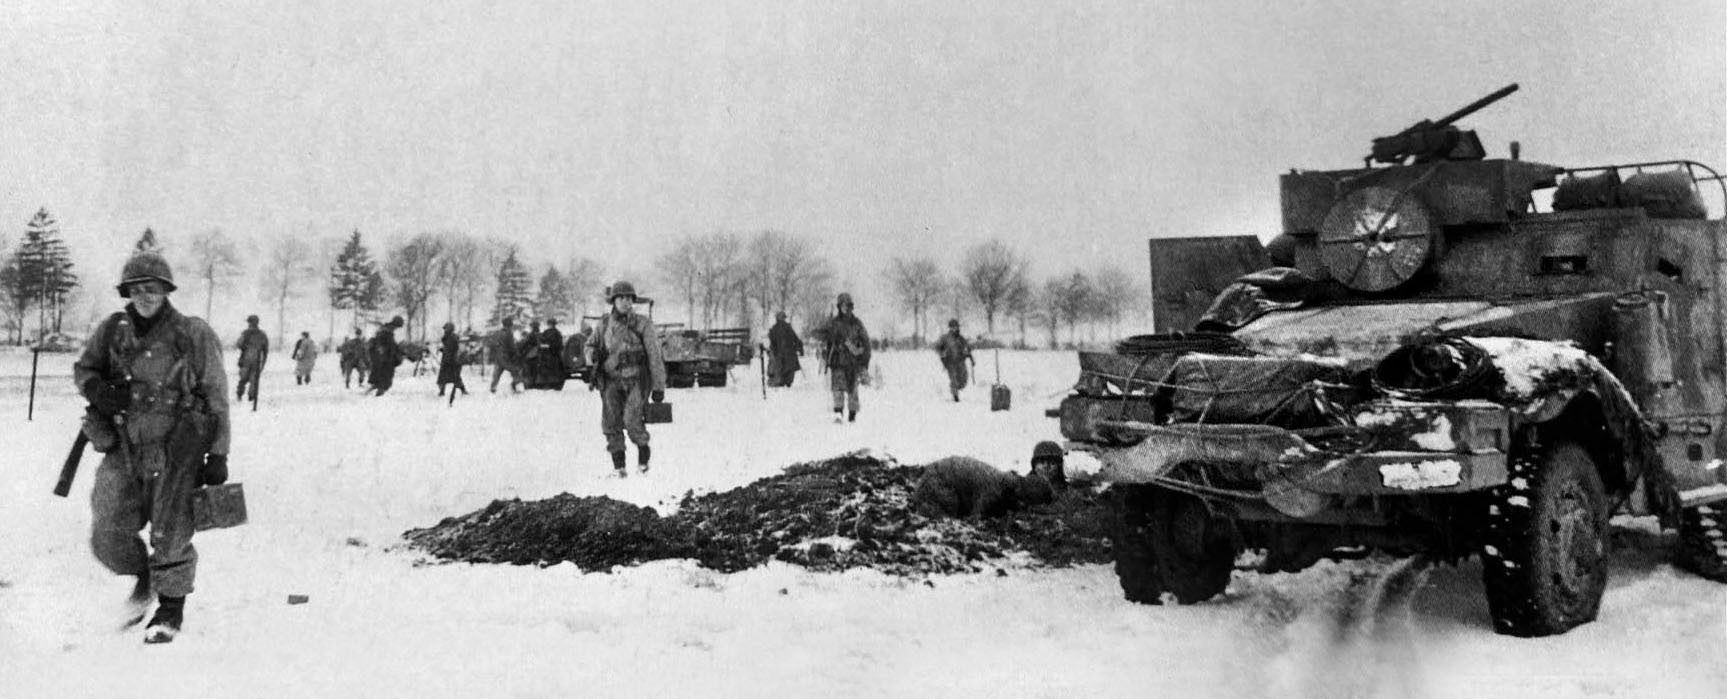 Armored infantry advance near Bastogne. Several GIs are carrying .30-caliber ammunition boxes. The large round object below the half track’s machine gun is a spool for communications wire. 